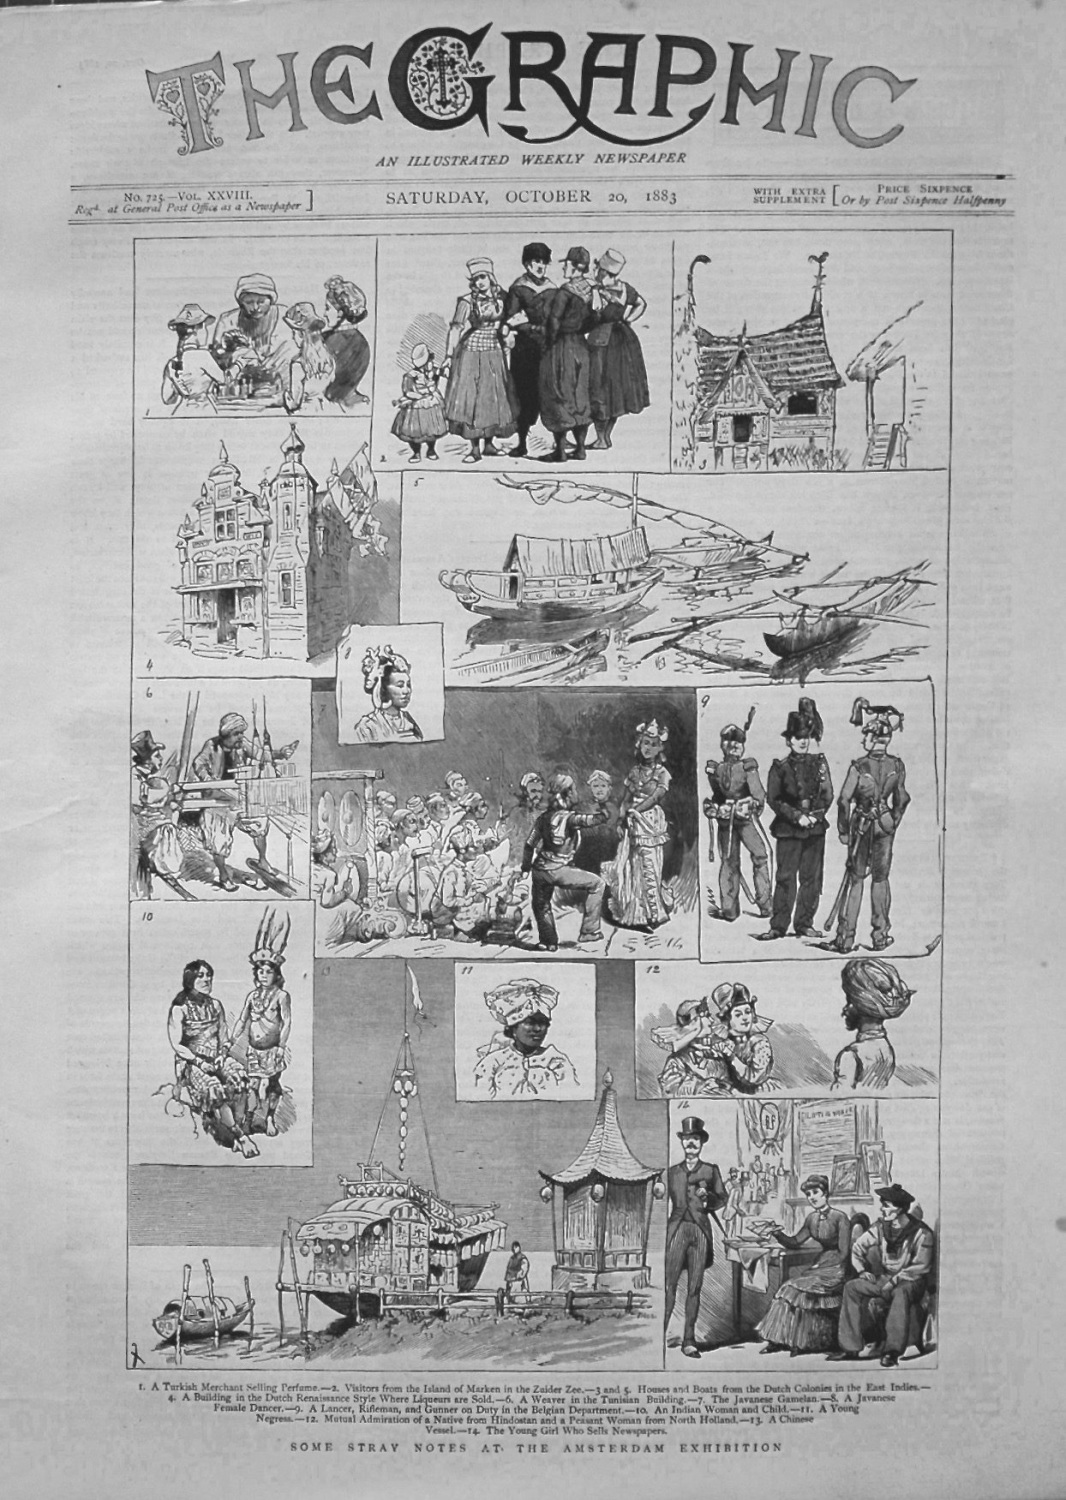 The Graphic, October 20th 1883.